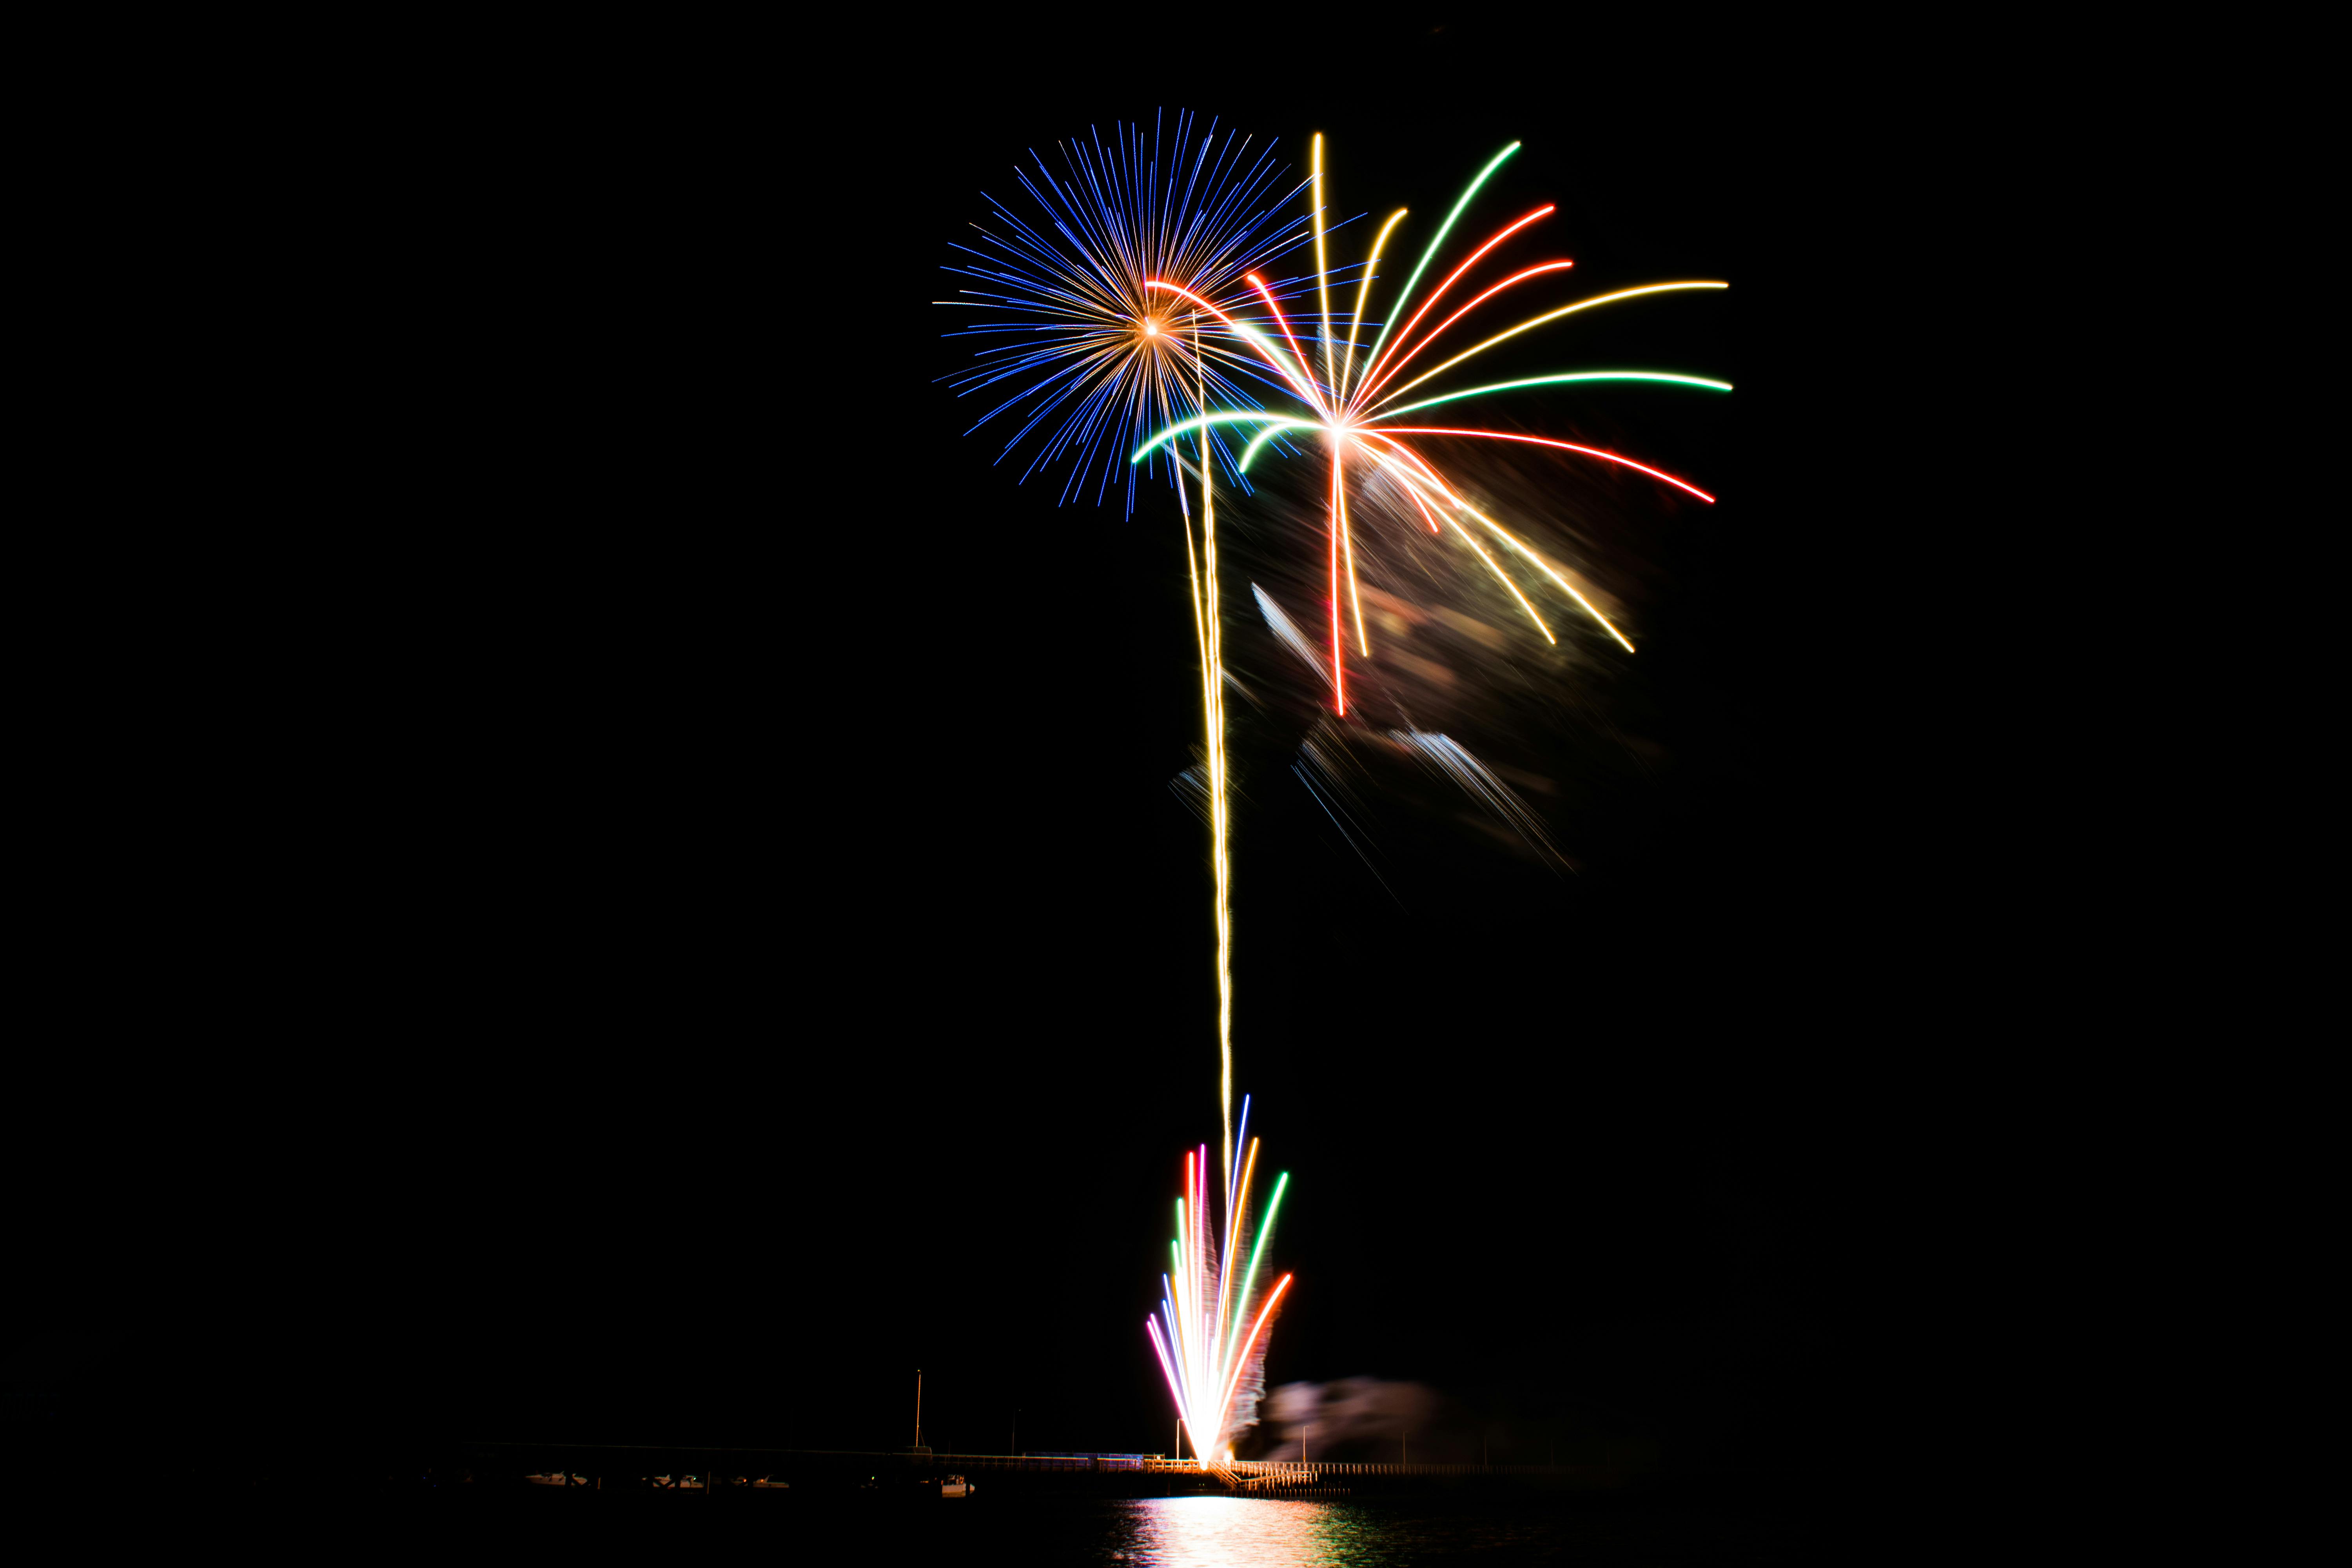 Australia Day 2016 fireworks at the Busselton Jetty